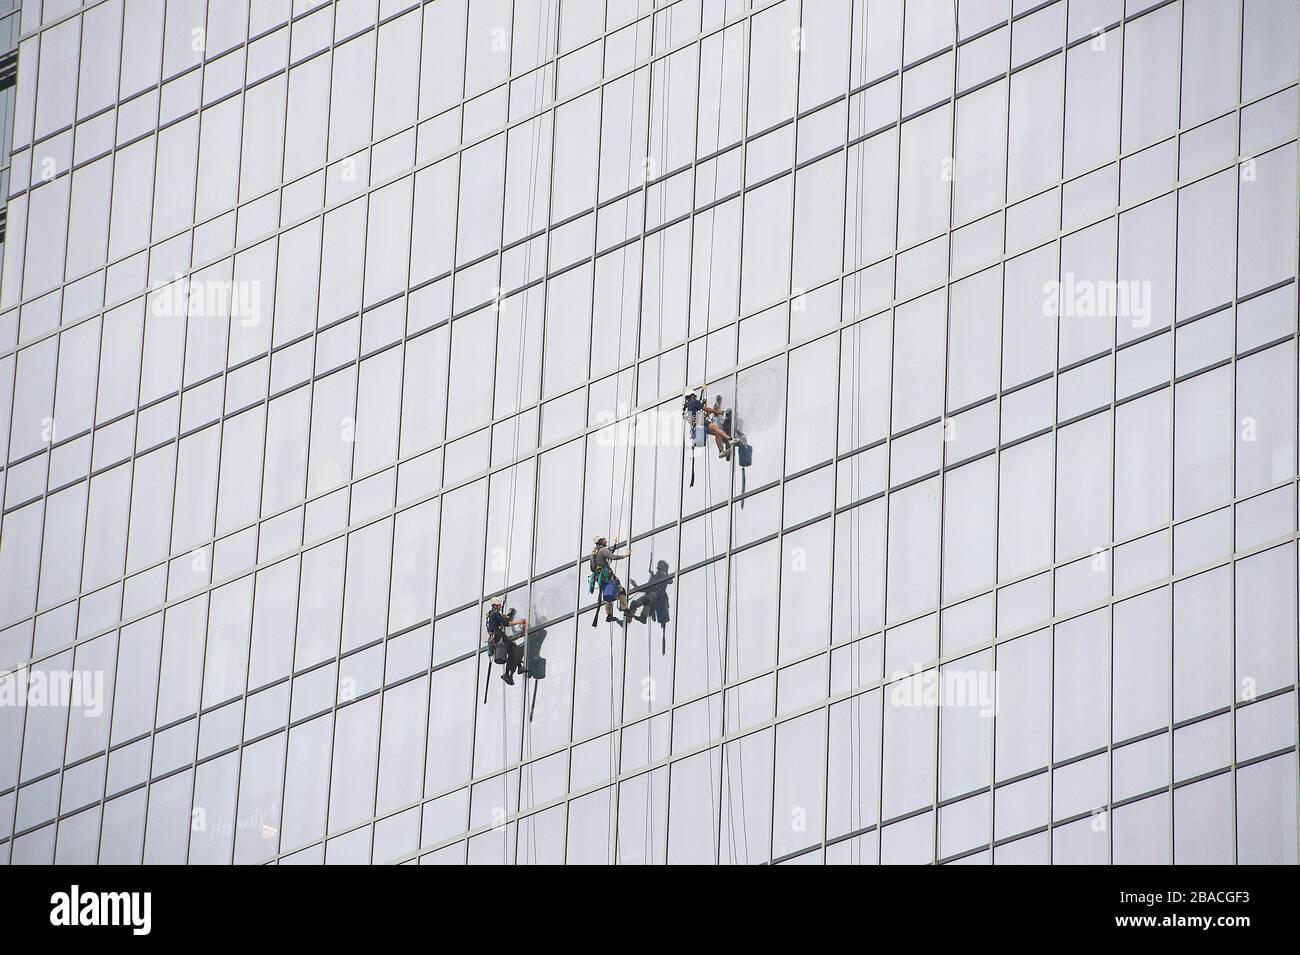 Downtown Austin, Texas, USA. 26th Mar, 2020. The world wide Pandemic Covid-19 impacted the daily workforce worldwide, A team of window washers working together to clean windows on a building in Downtown Austin, Texas. Mario Cantu/CSM/Alamy Live News Stock Photo